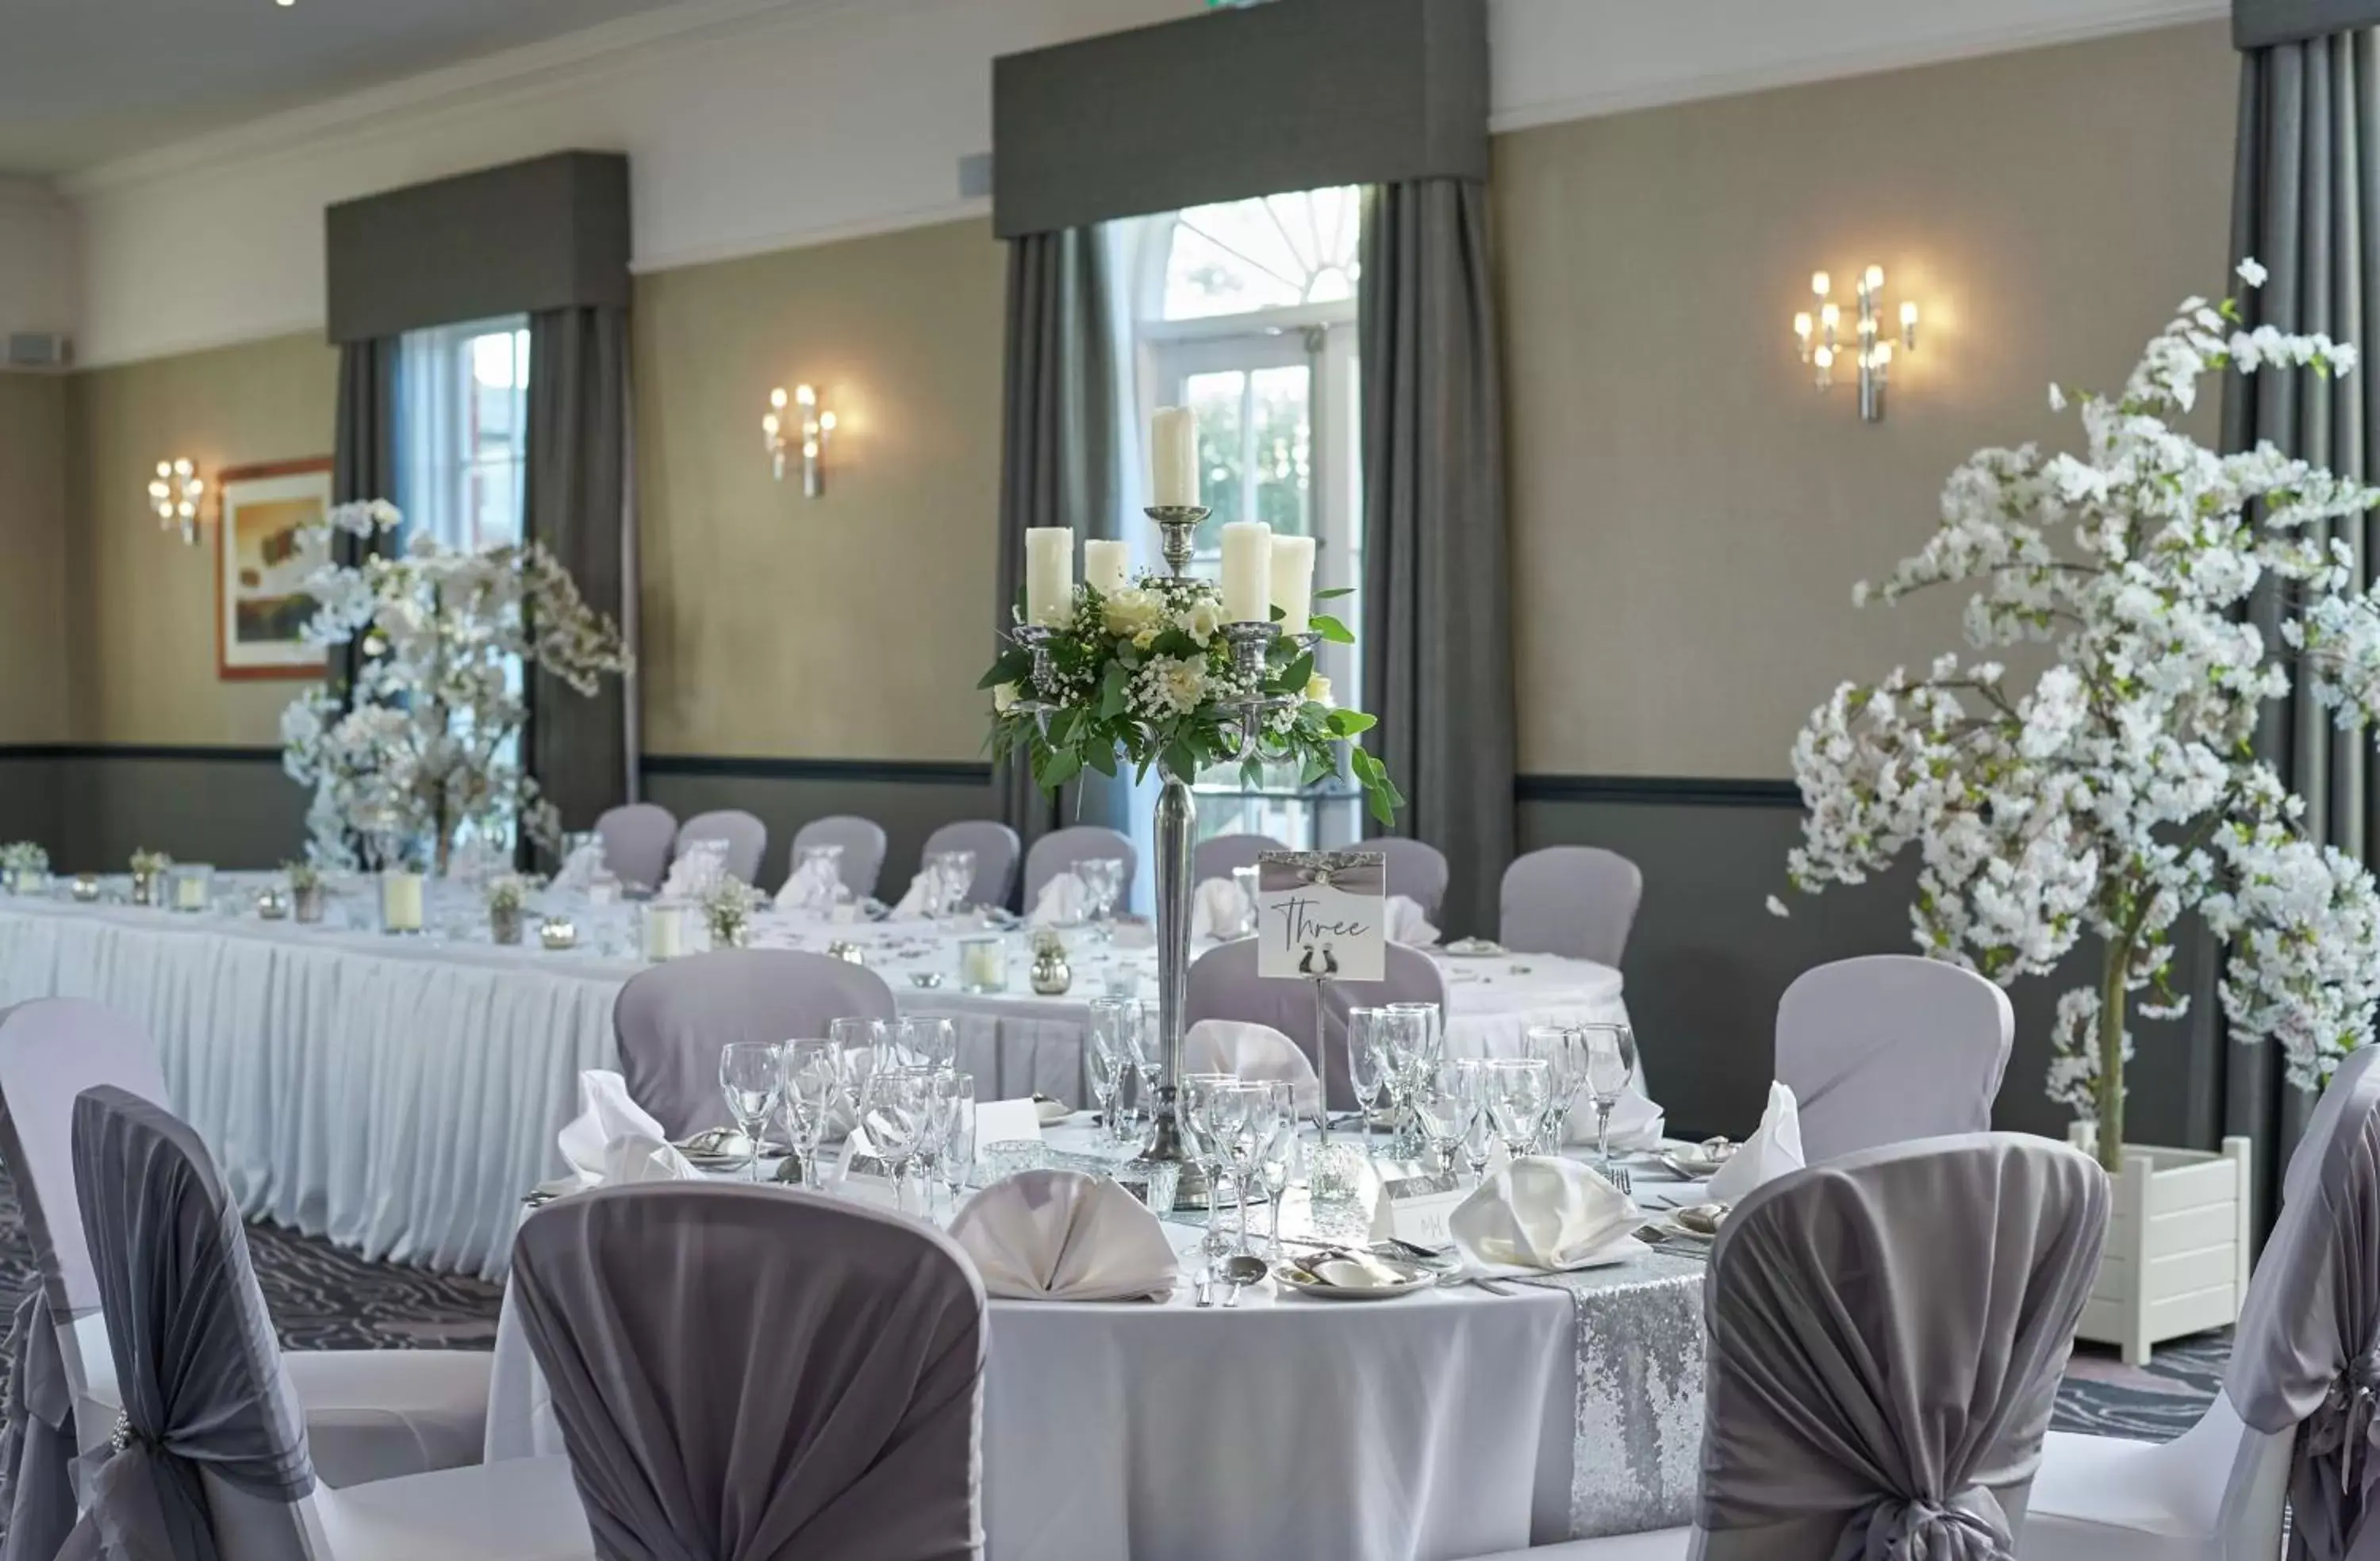 Meeting/conference room, Banquet Facilities in Hilton Puckrup Hall, Tewkesbury